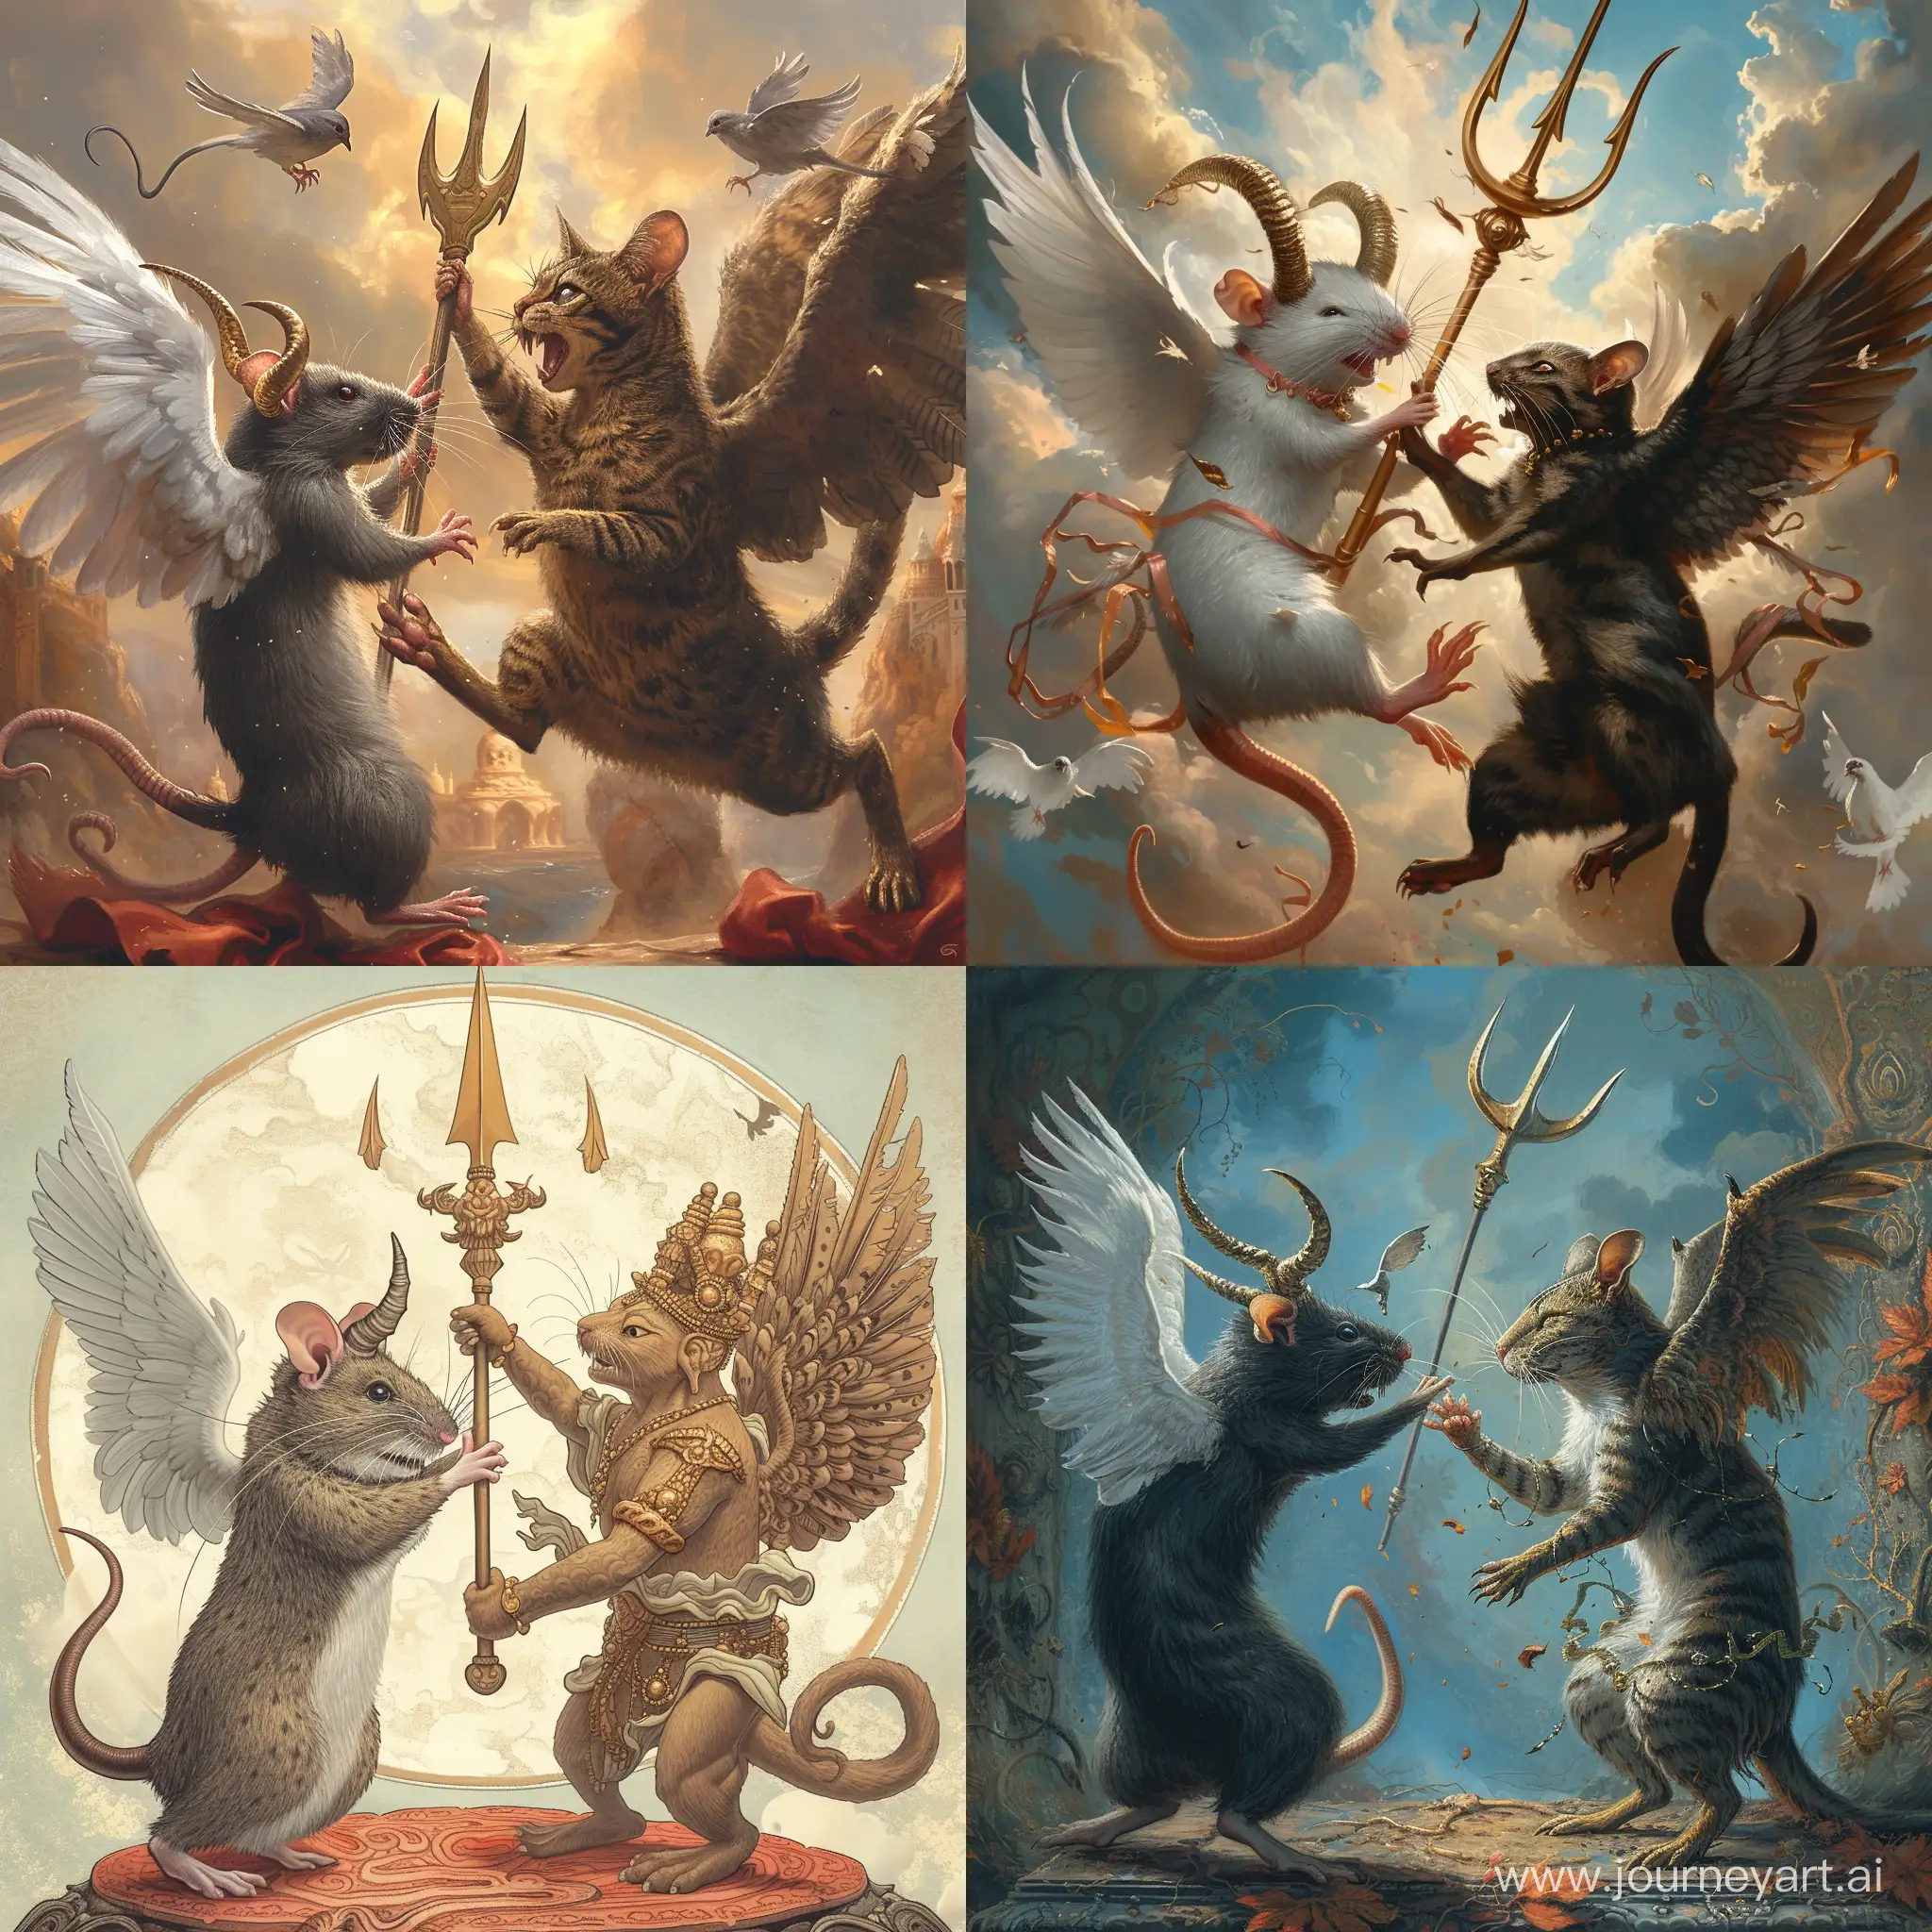 Mythical-Battle-Horned-Rat-vs-Taoist-Cat-Buddha-with-Trident-and-Wings